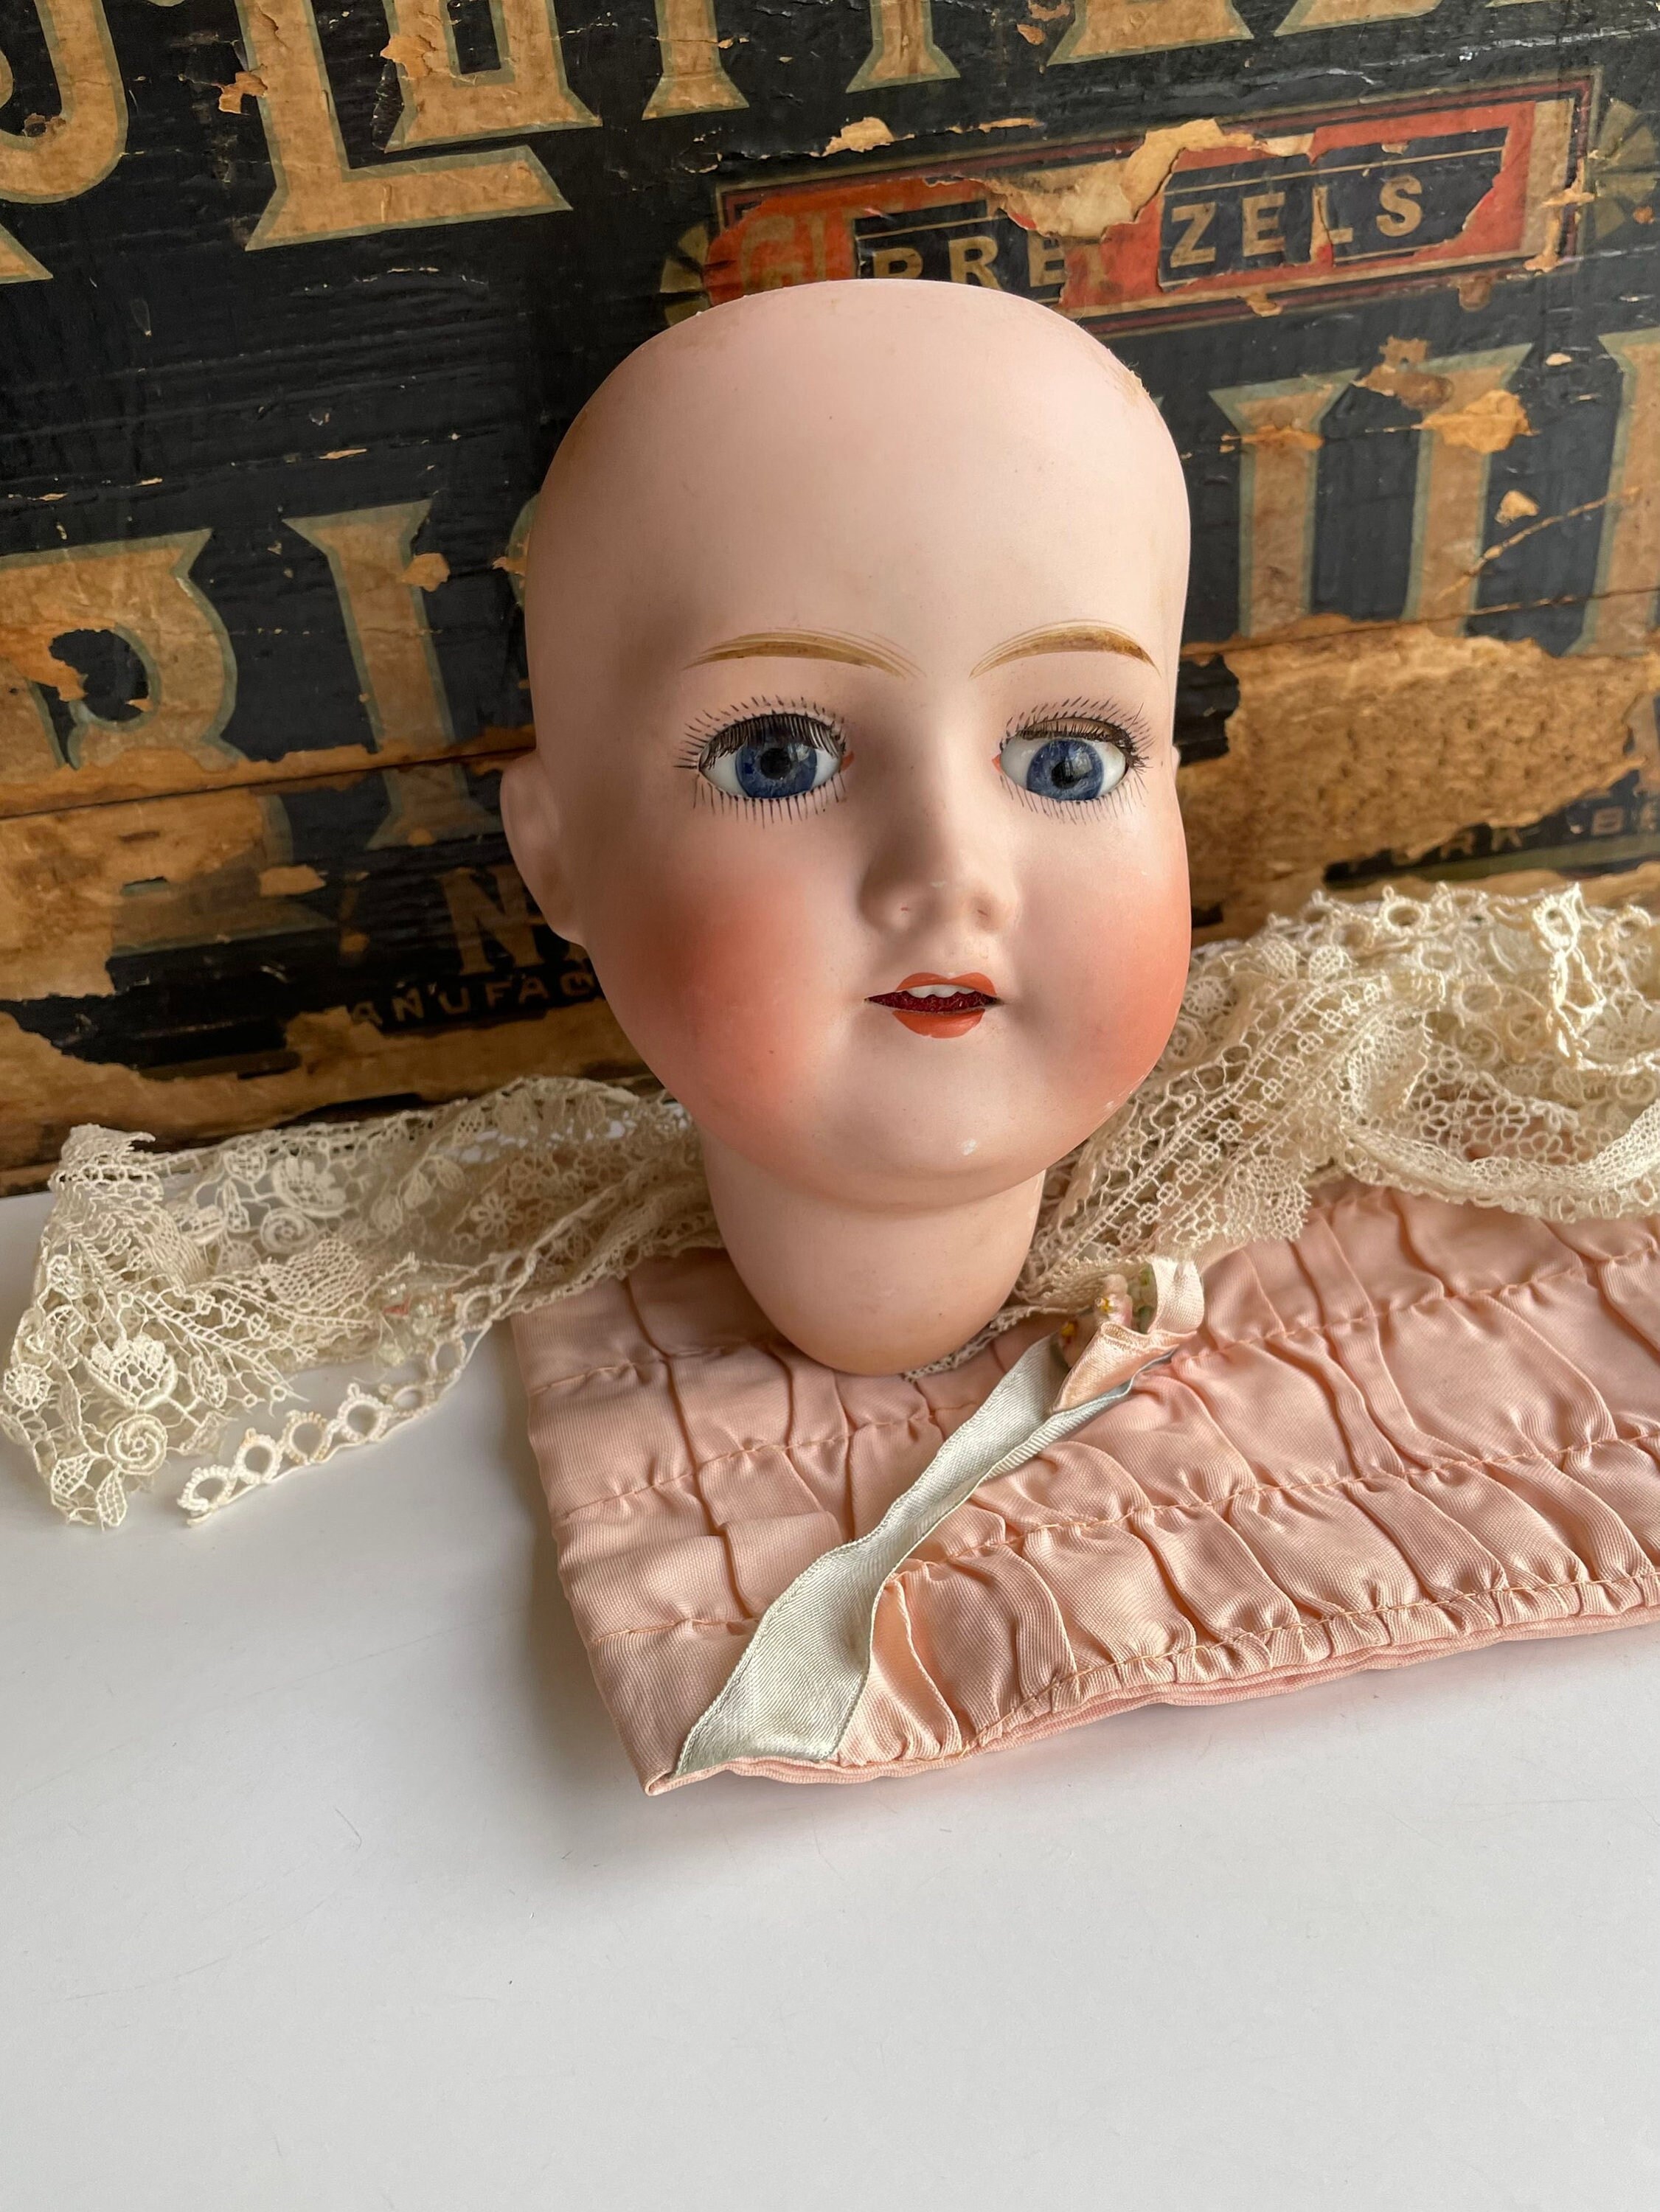 Antique Bisque Doll Head With Glass Eyes Made in Japan 